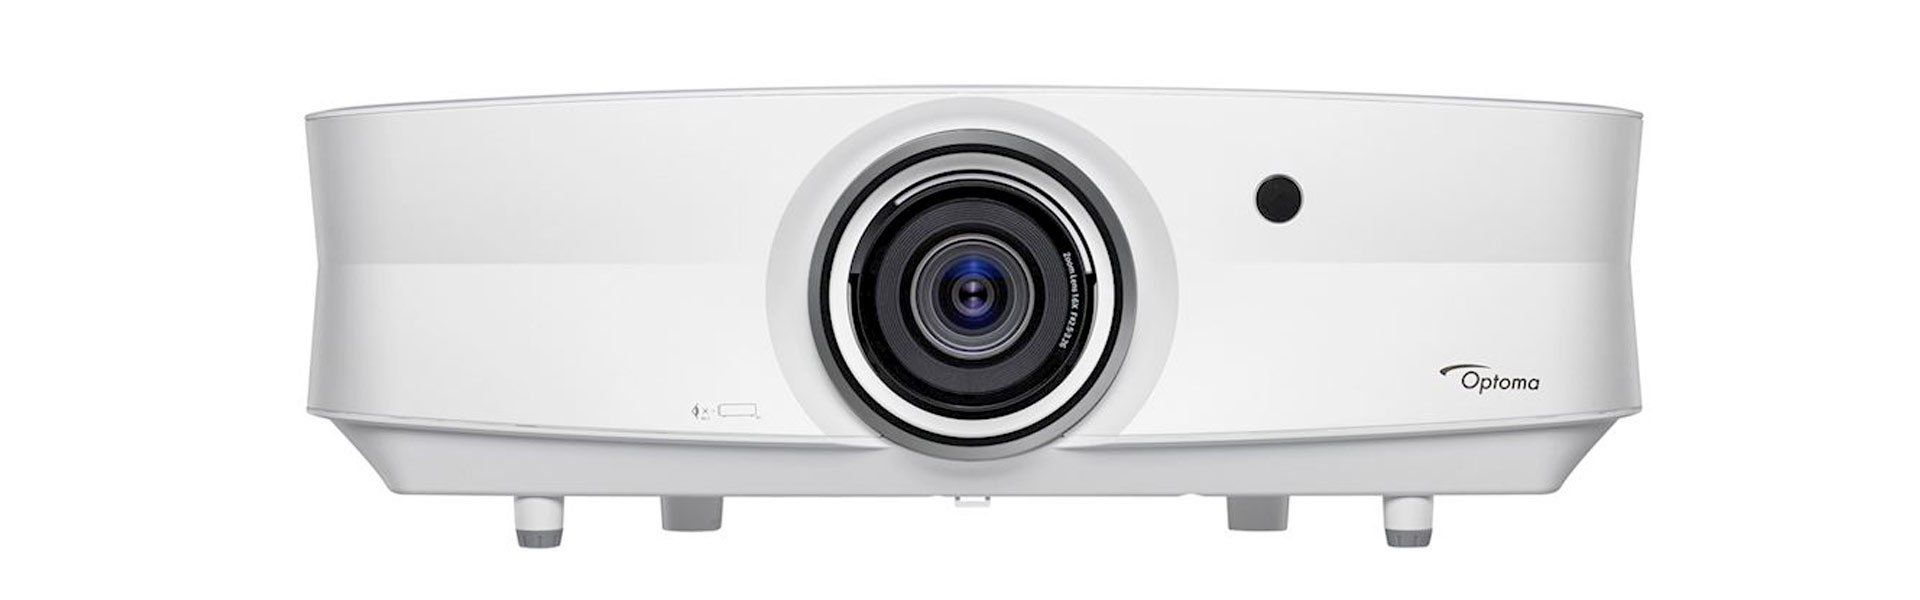 Optoma Projectors from Projectorpoint